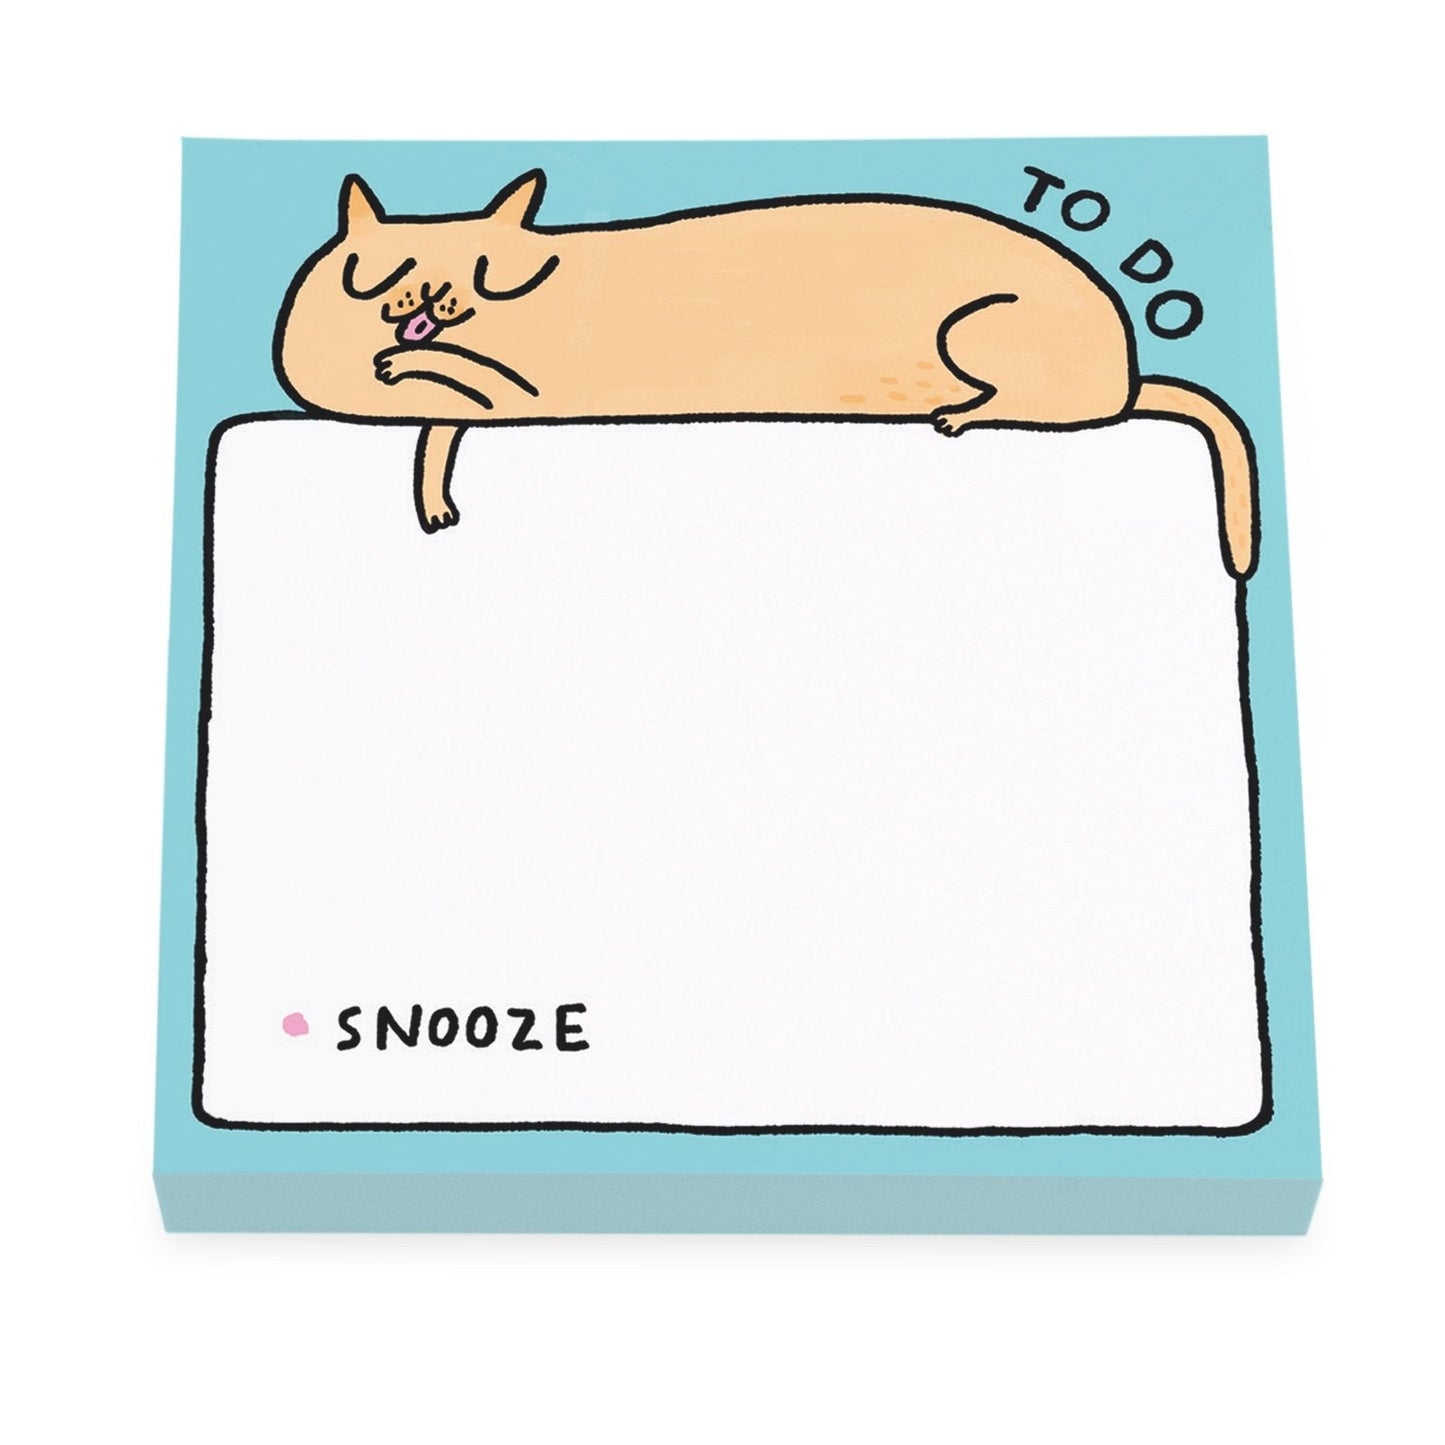 To Do Snooze Cat Post-It Notes